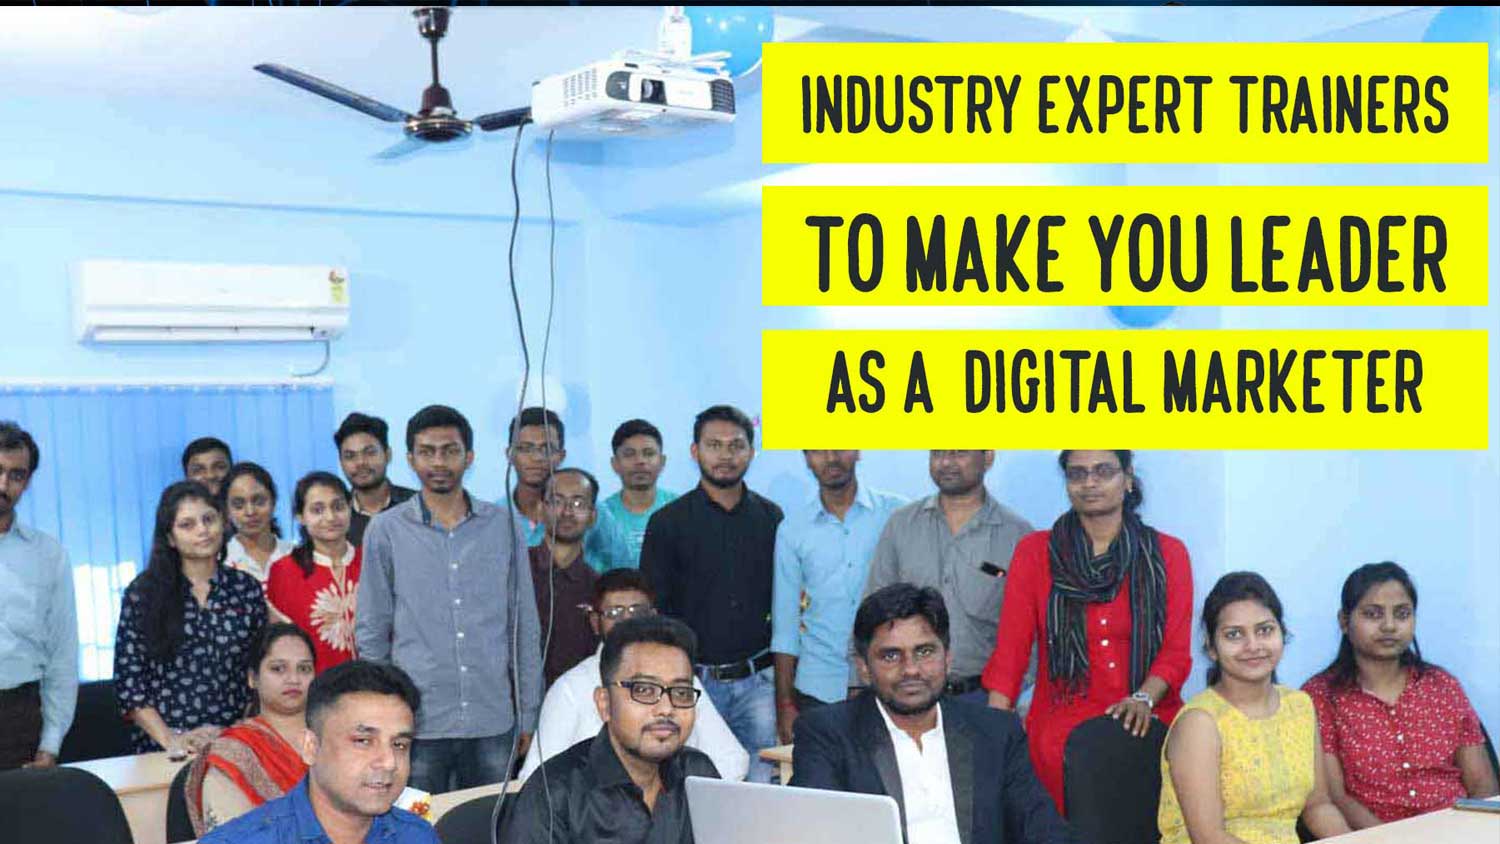 Expert trainers to assist you in Digital Marketing